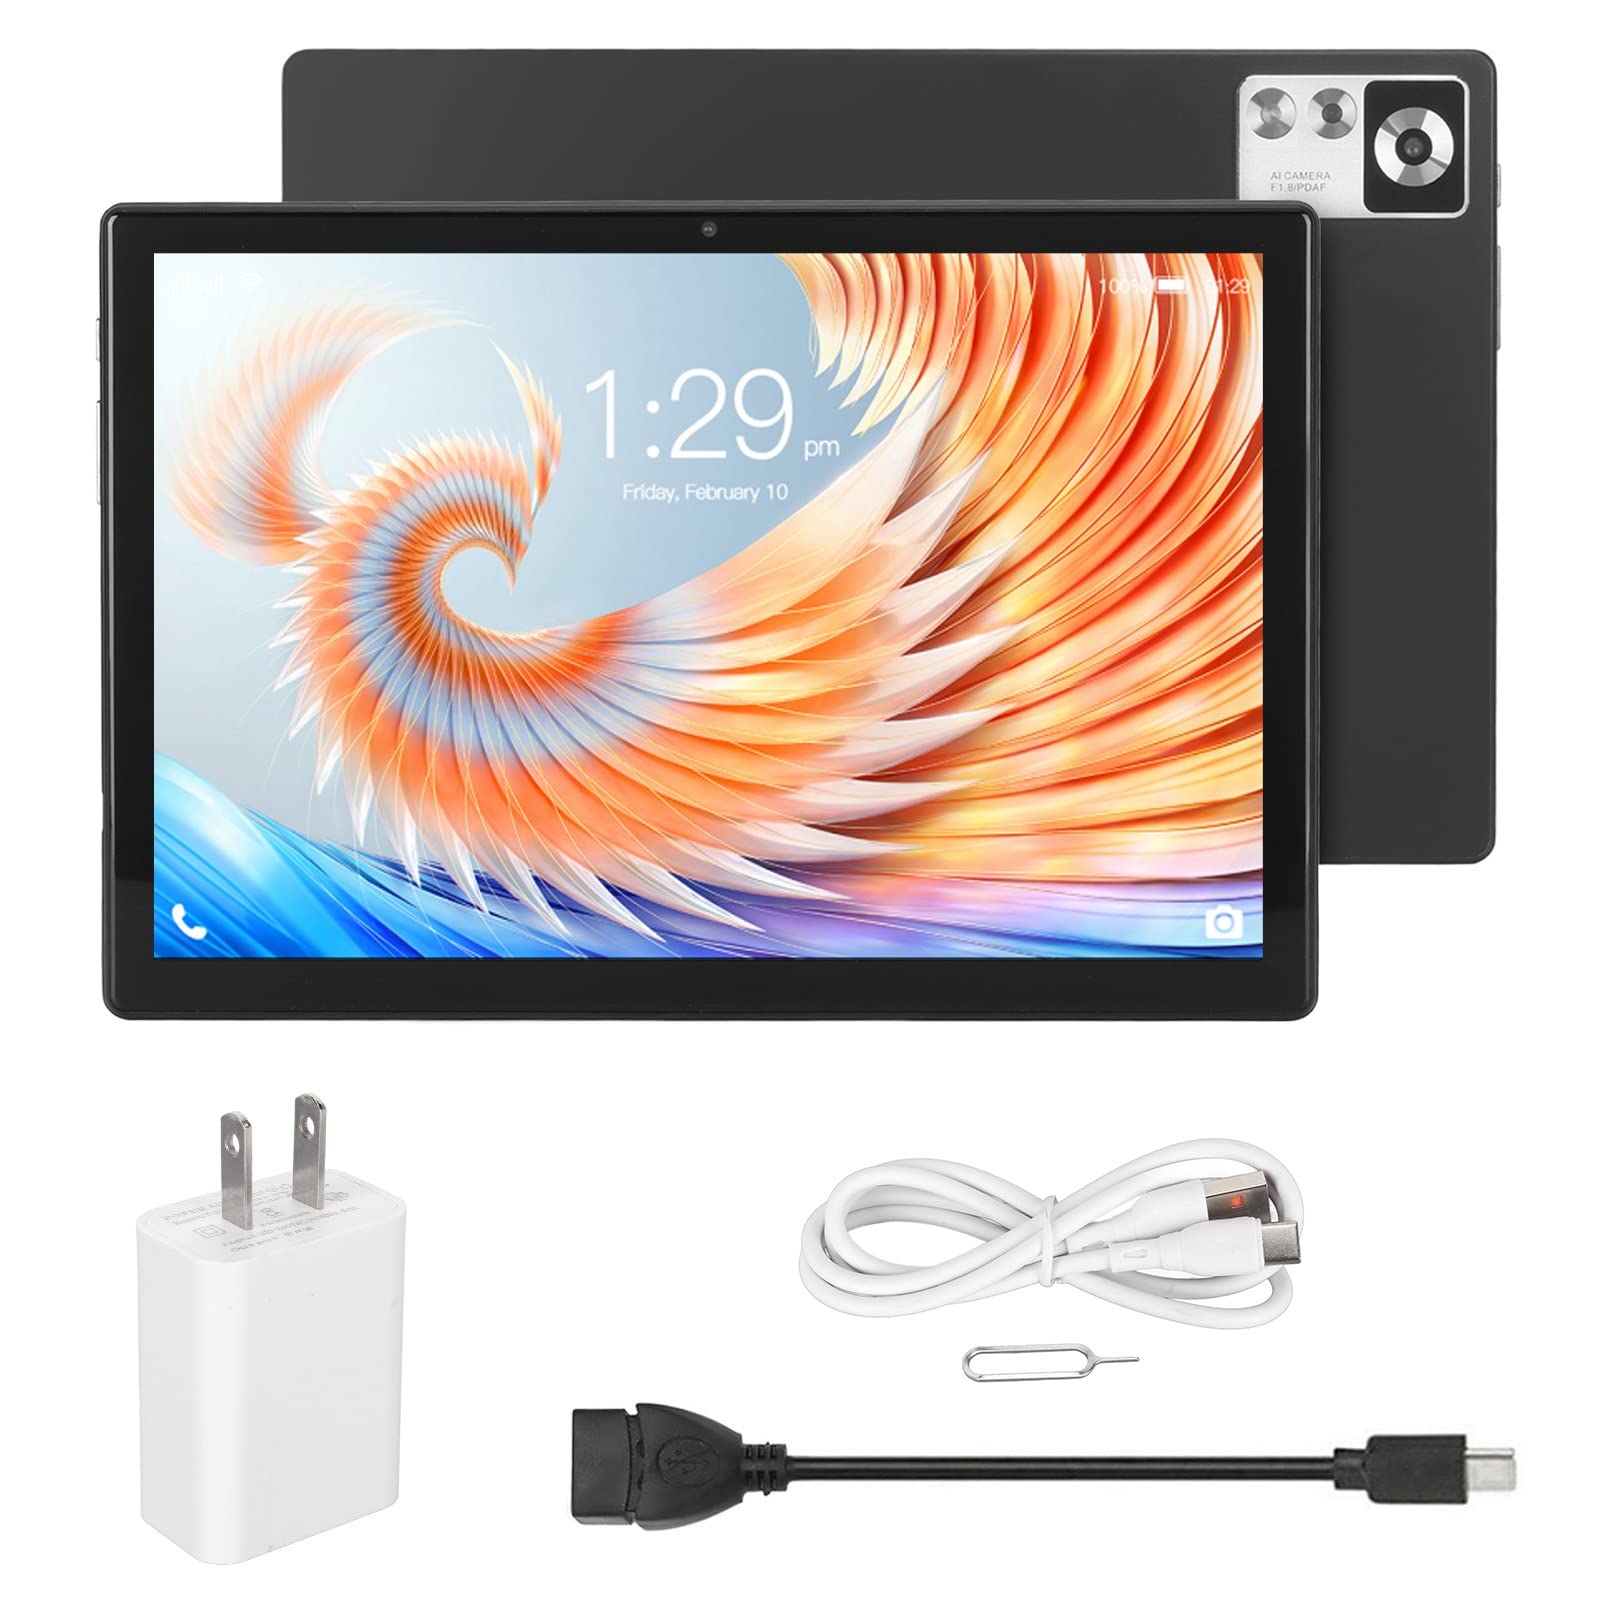 10.1 Inch Tablet Android12 Tablet PC, Octa Core Processor, 8GB RAM 256GB ROM, FHD Touchscreen, 4G Unlock Tablet, 8MP+16MP Dual Camera, 2.4G/5G WiFi, BT 5.0, 7000mAh Battery